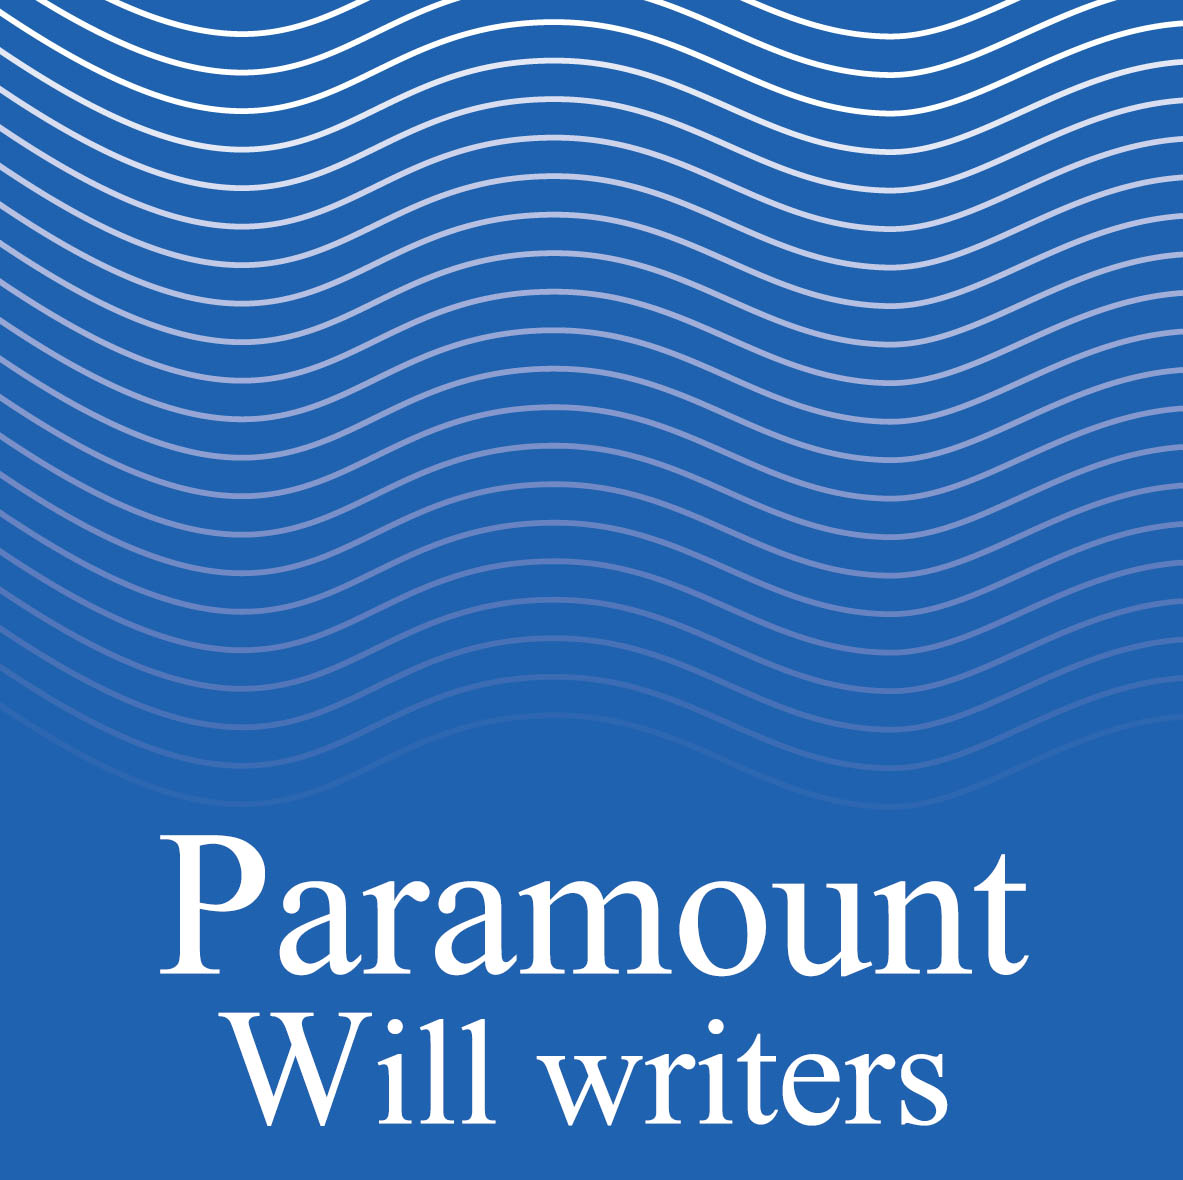 Contact Us, About Us, Paramount Will Writer, Paramount Wills, will writing services, how to write a simple will, writing a will, will writer, how to write a will, how to make a will, will preparation, how to make out a will, preparing a will, creating a will, do your own will, how do i make a will, how to write your own will